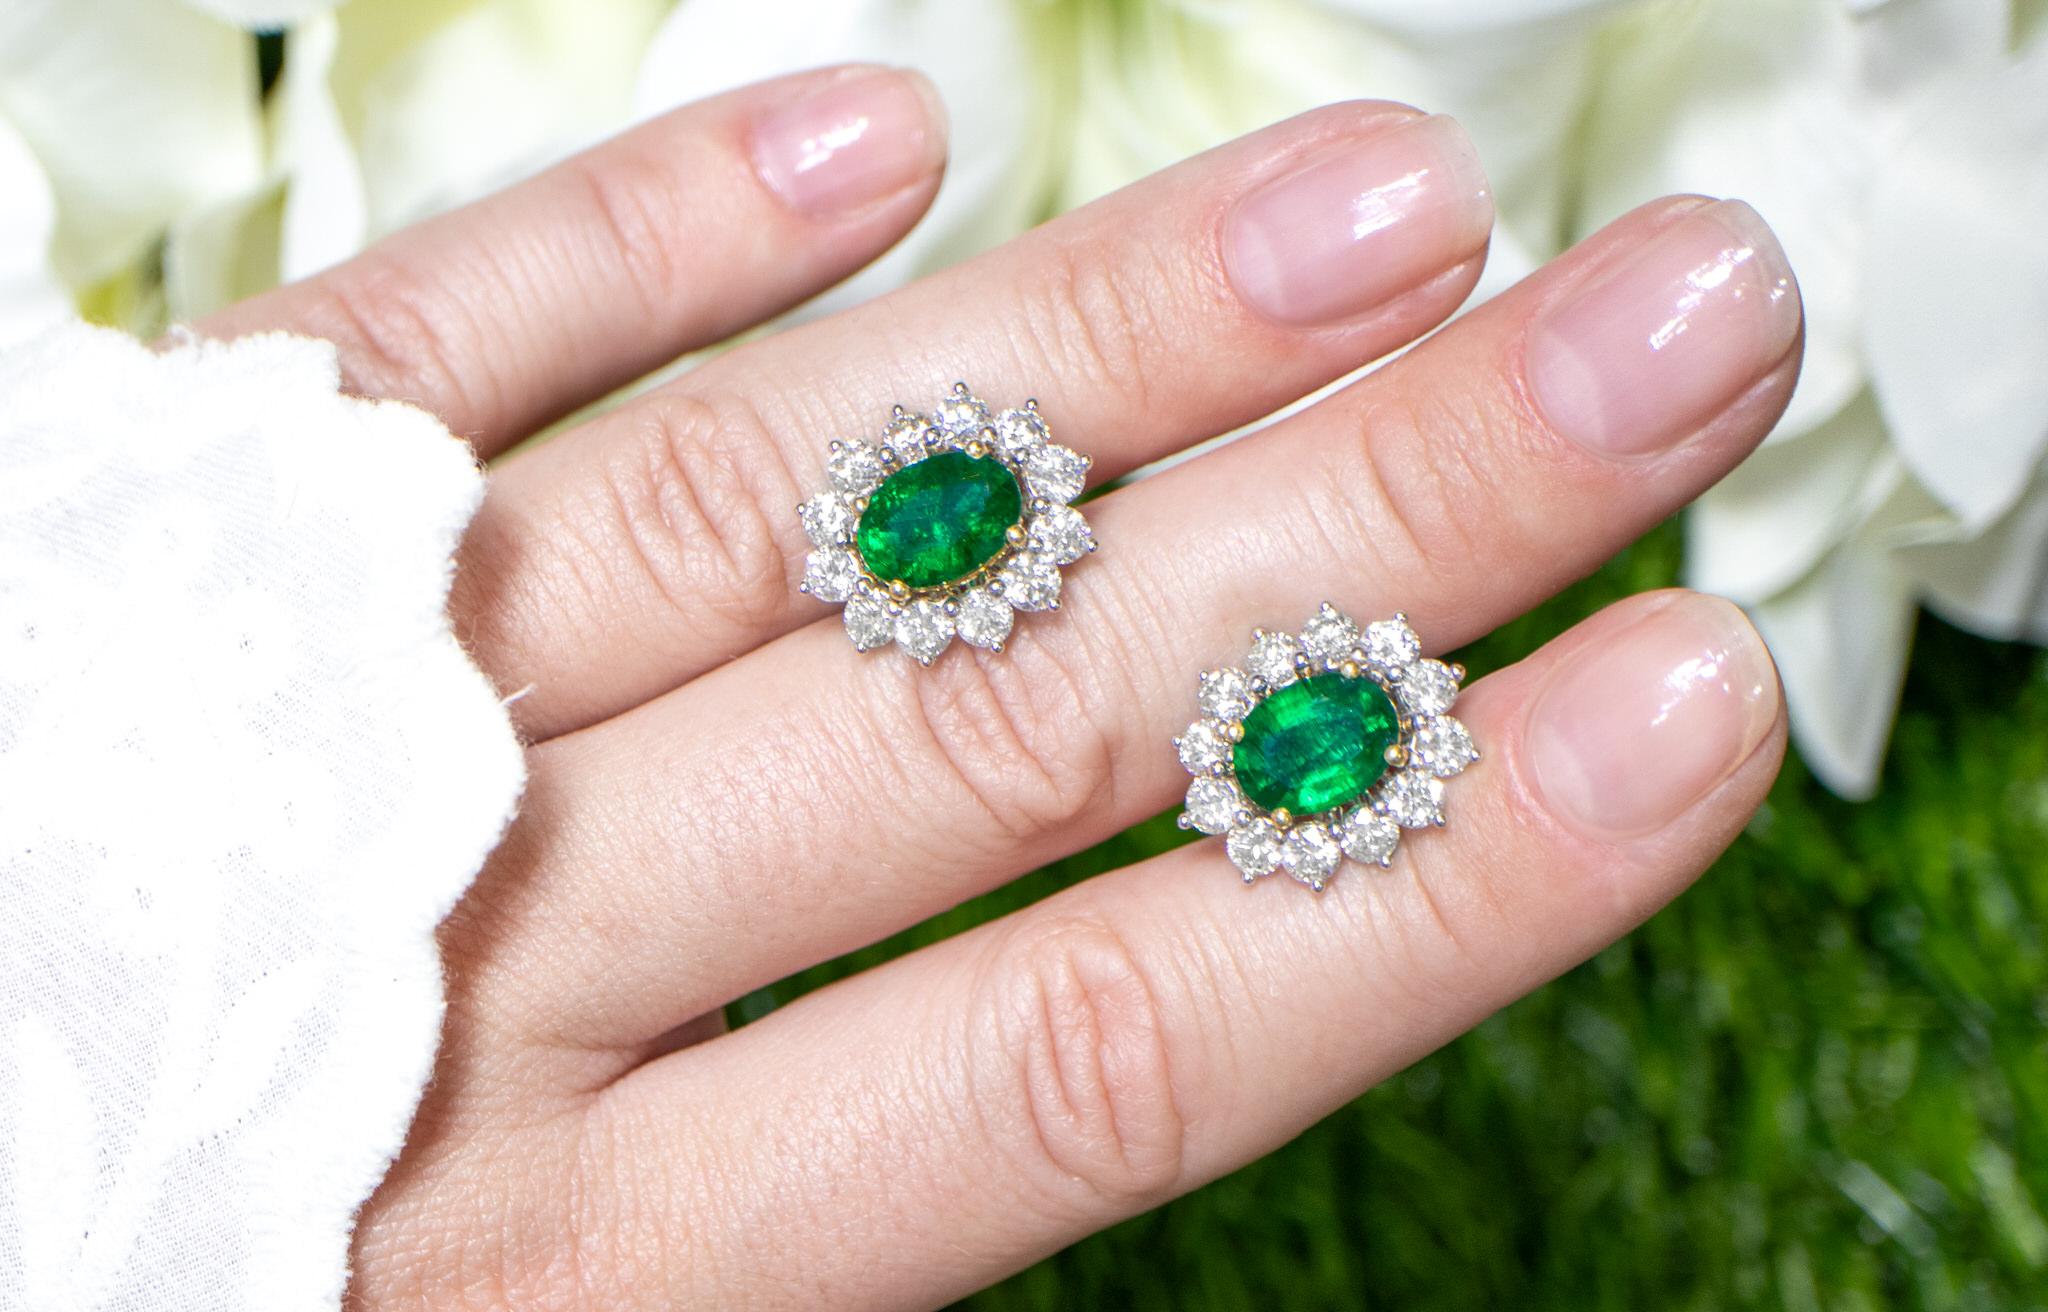 Emerald Stud Earrings Large Diamond Halo 7.42 Carats 18K Gold In Excellent Condition For Sale In Laguna Niguel, CA